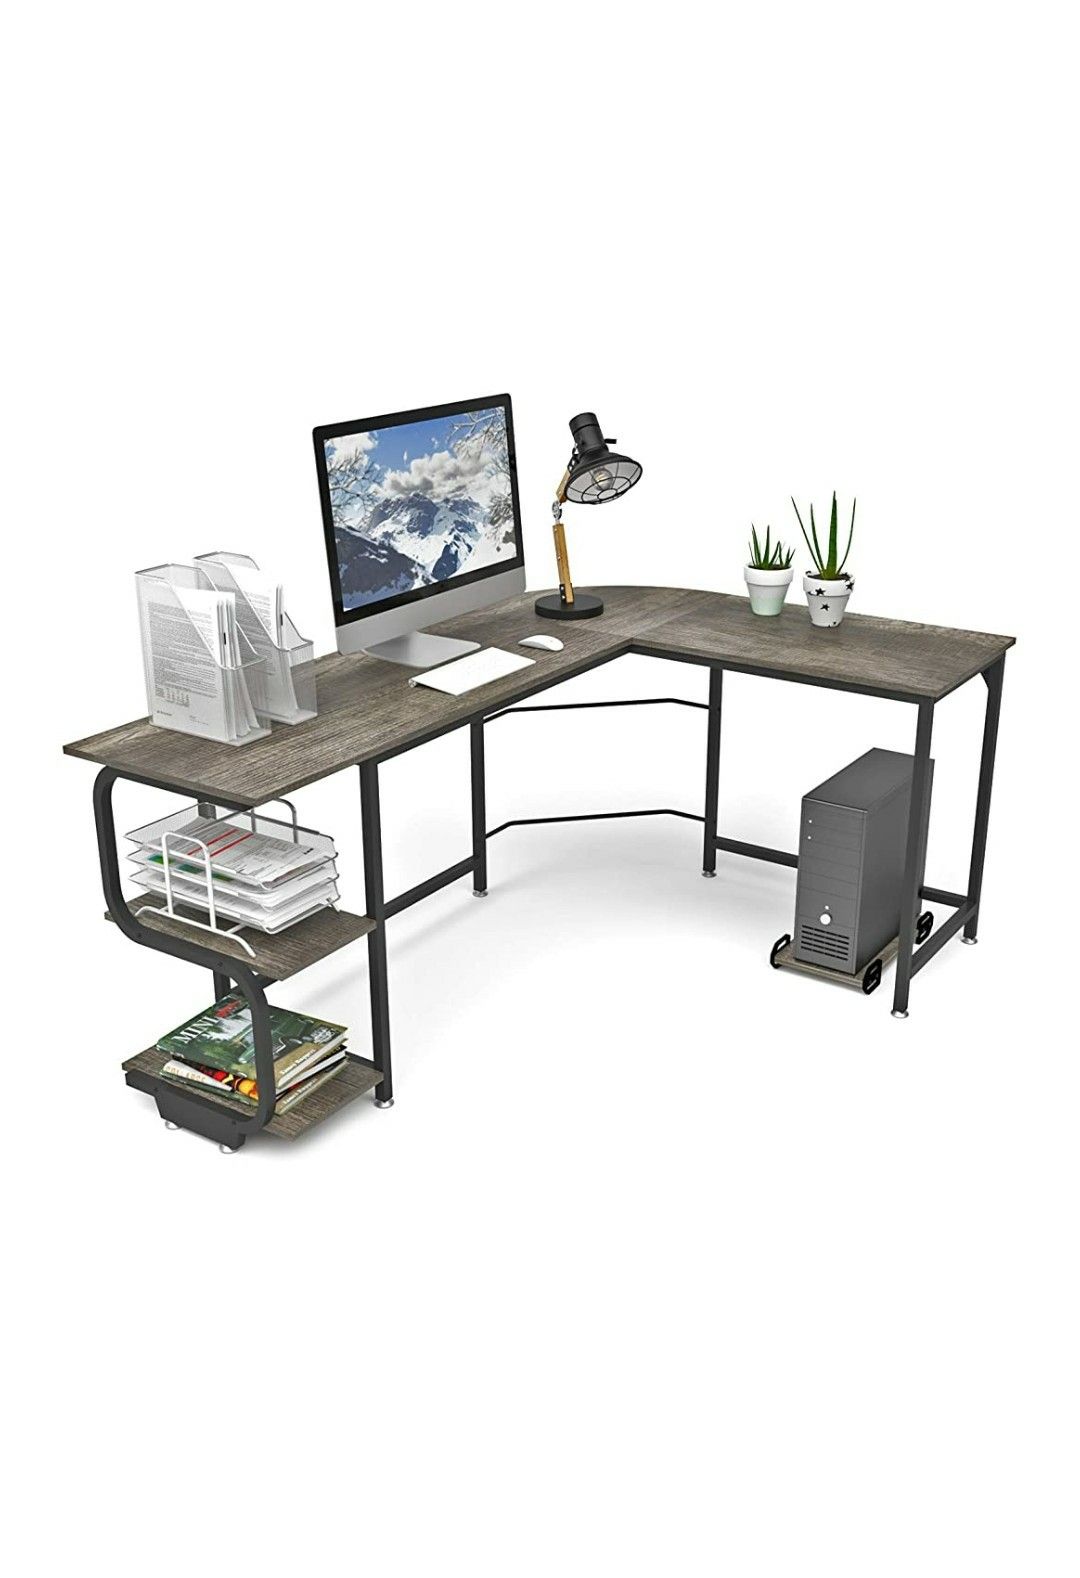 (B8) Teraves Reversible L Shaped Desk with Shelves Round Corner Computer Desk Gaming Table Workstation for Home Office